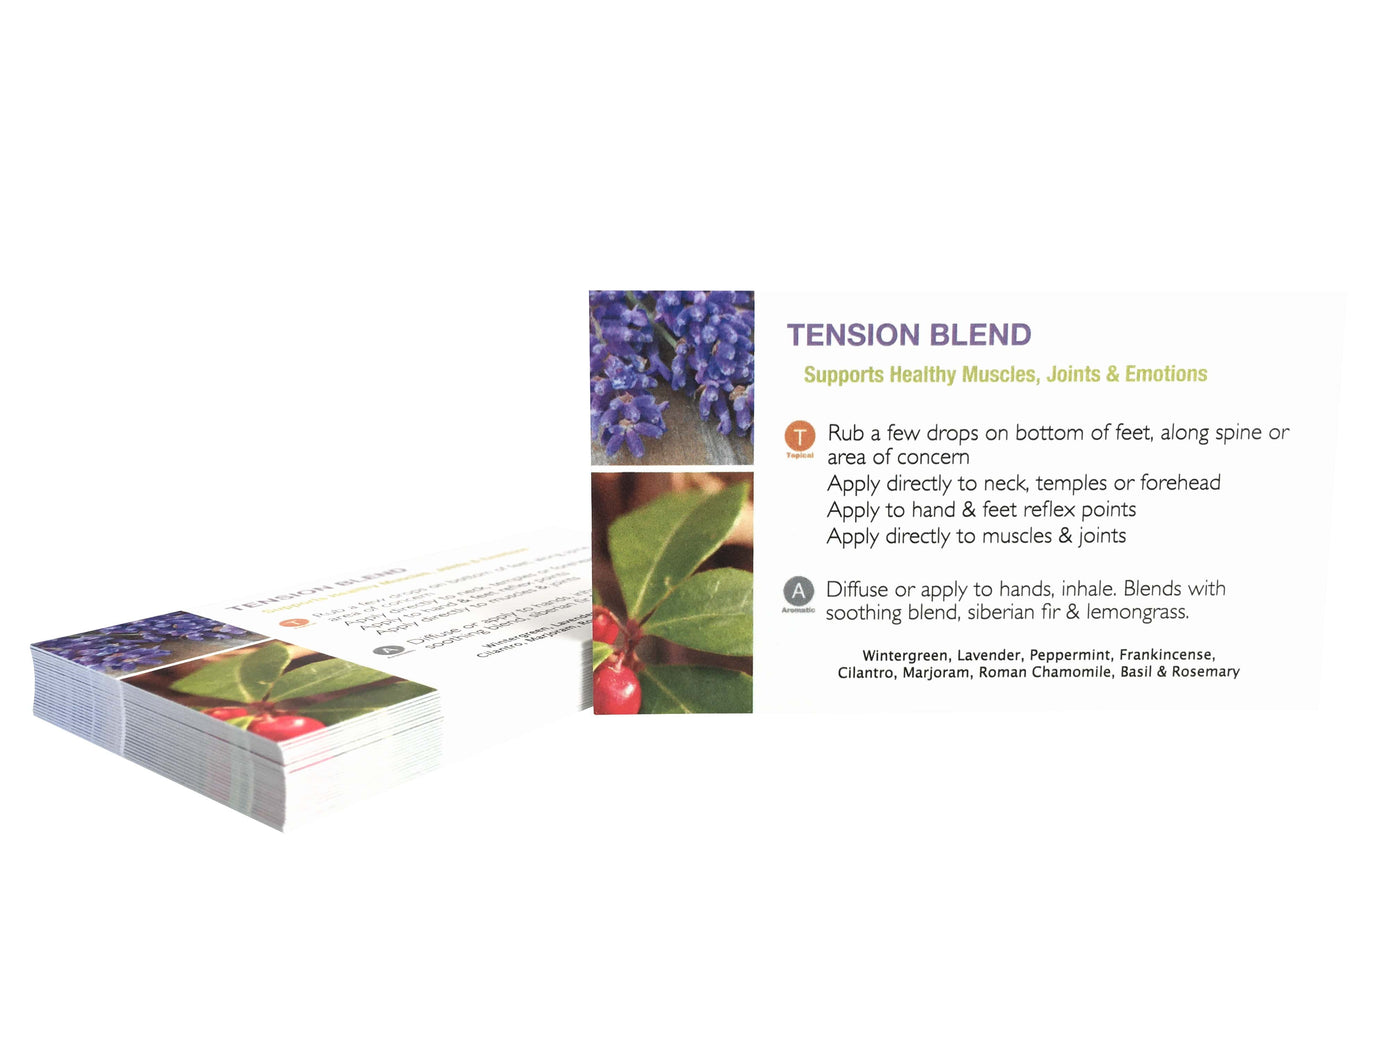 Individual Essential Oil Cards - 25 Cards in Each - Oil Life Canada - Canada's Best Essential Oil Supplies